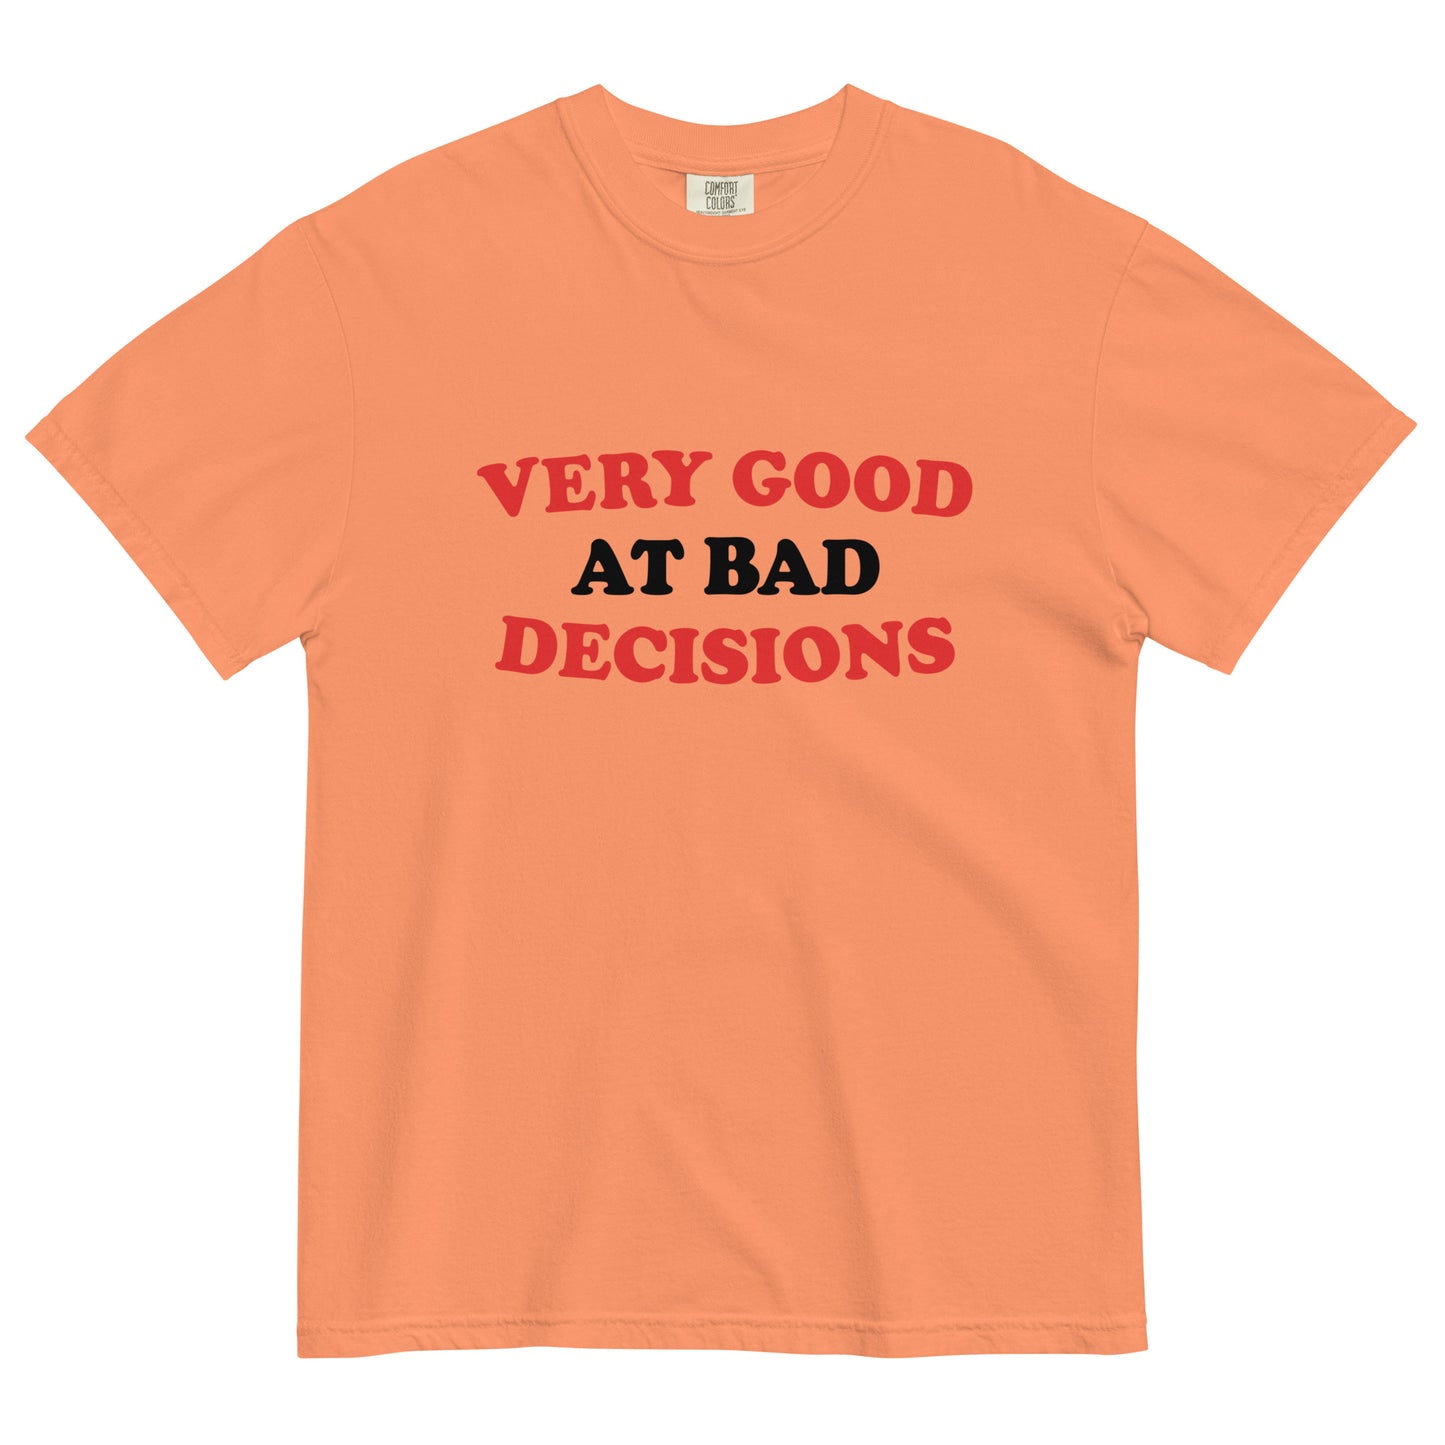 Very Good At Bad Decisions Men's Relaxed Fit Tee